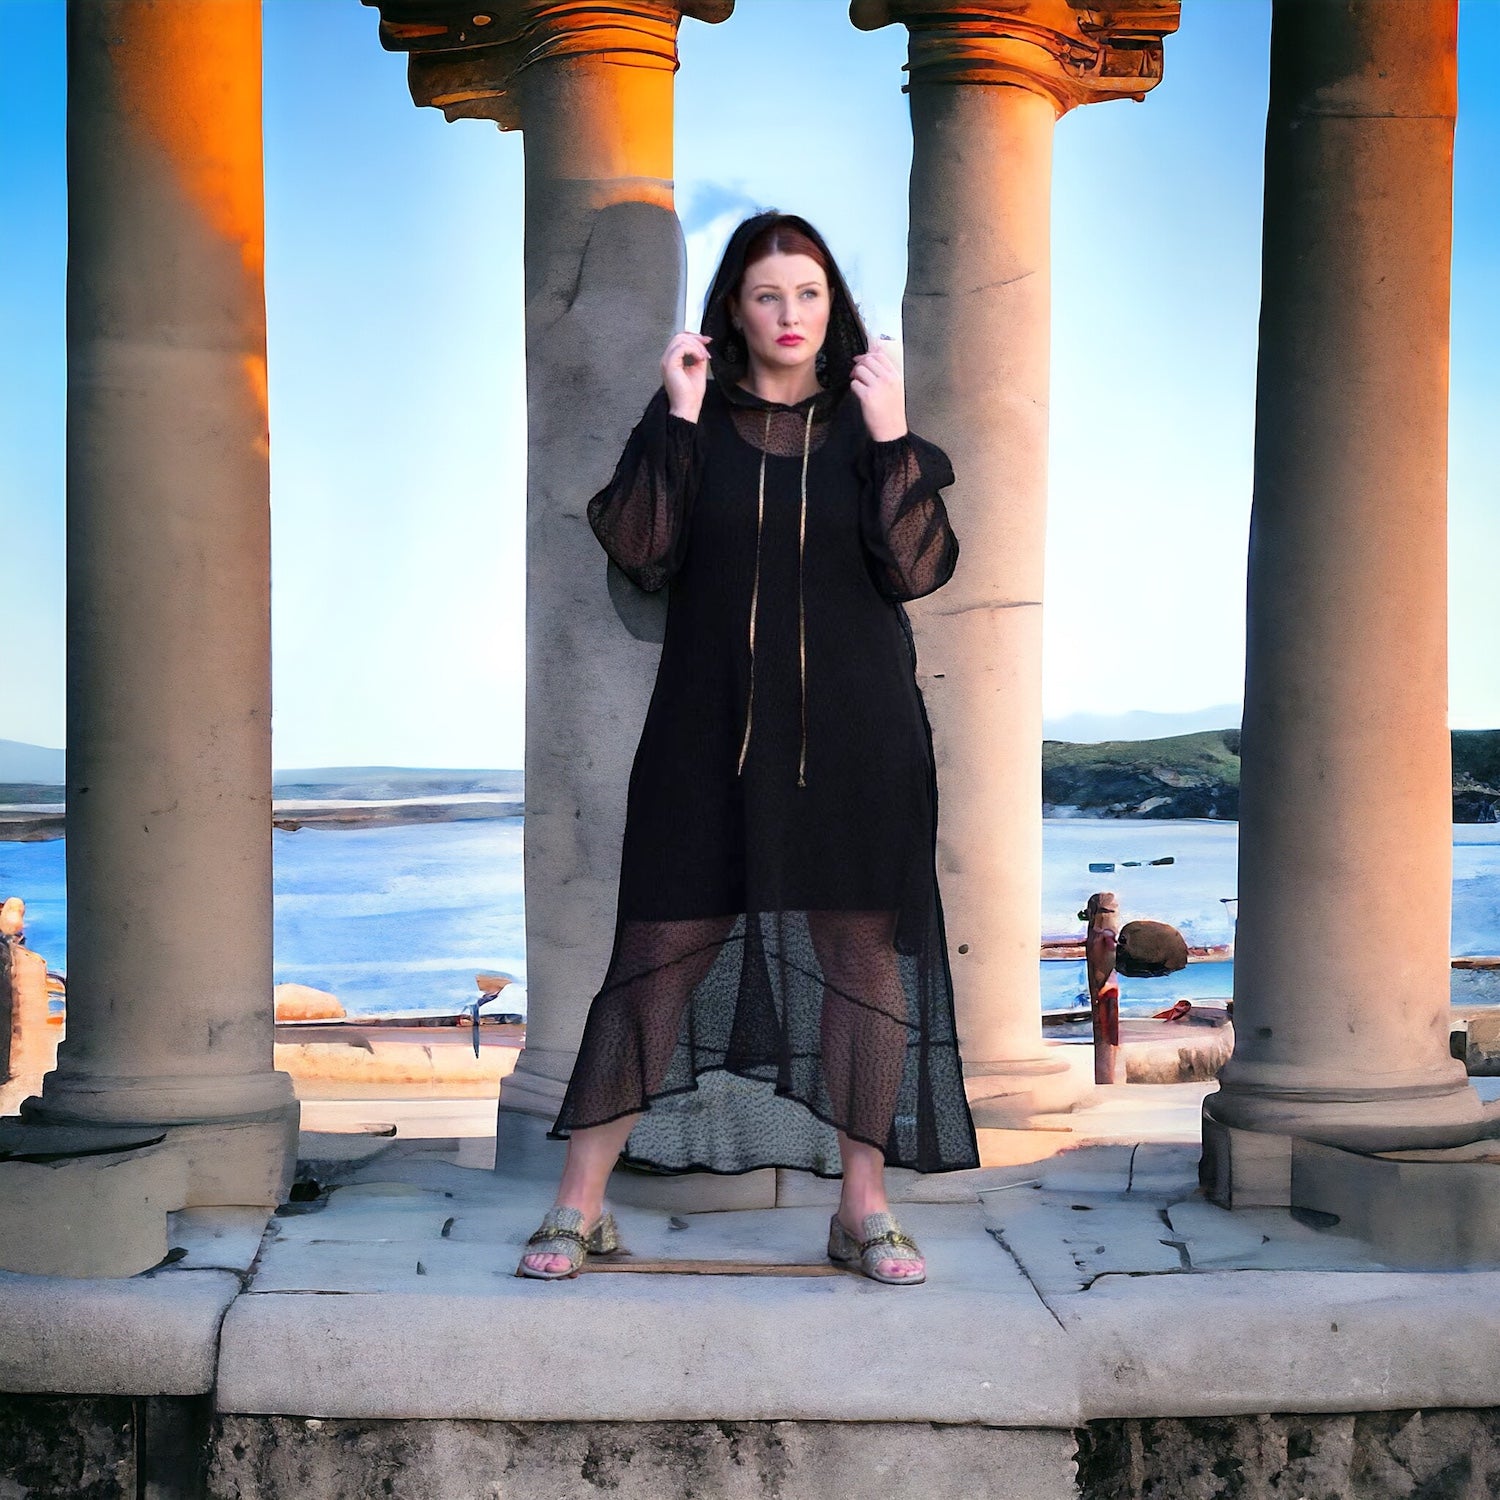 Plus Size Aphrodite Black Holiday Resort Dress with hoodie and black undergarment, styled with golden sandals for a chic and comfortable holiday look.